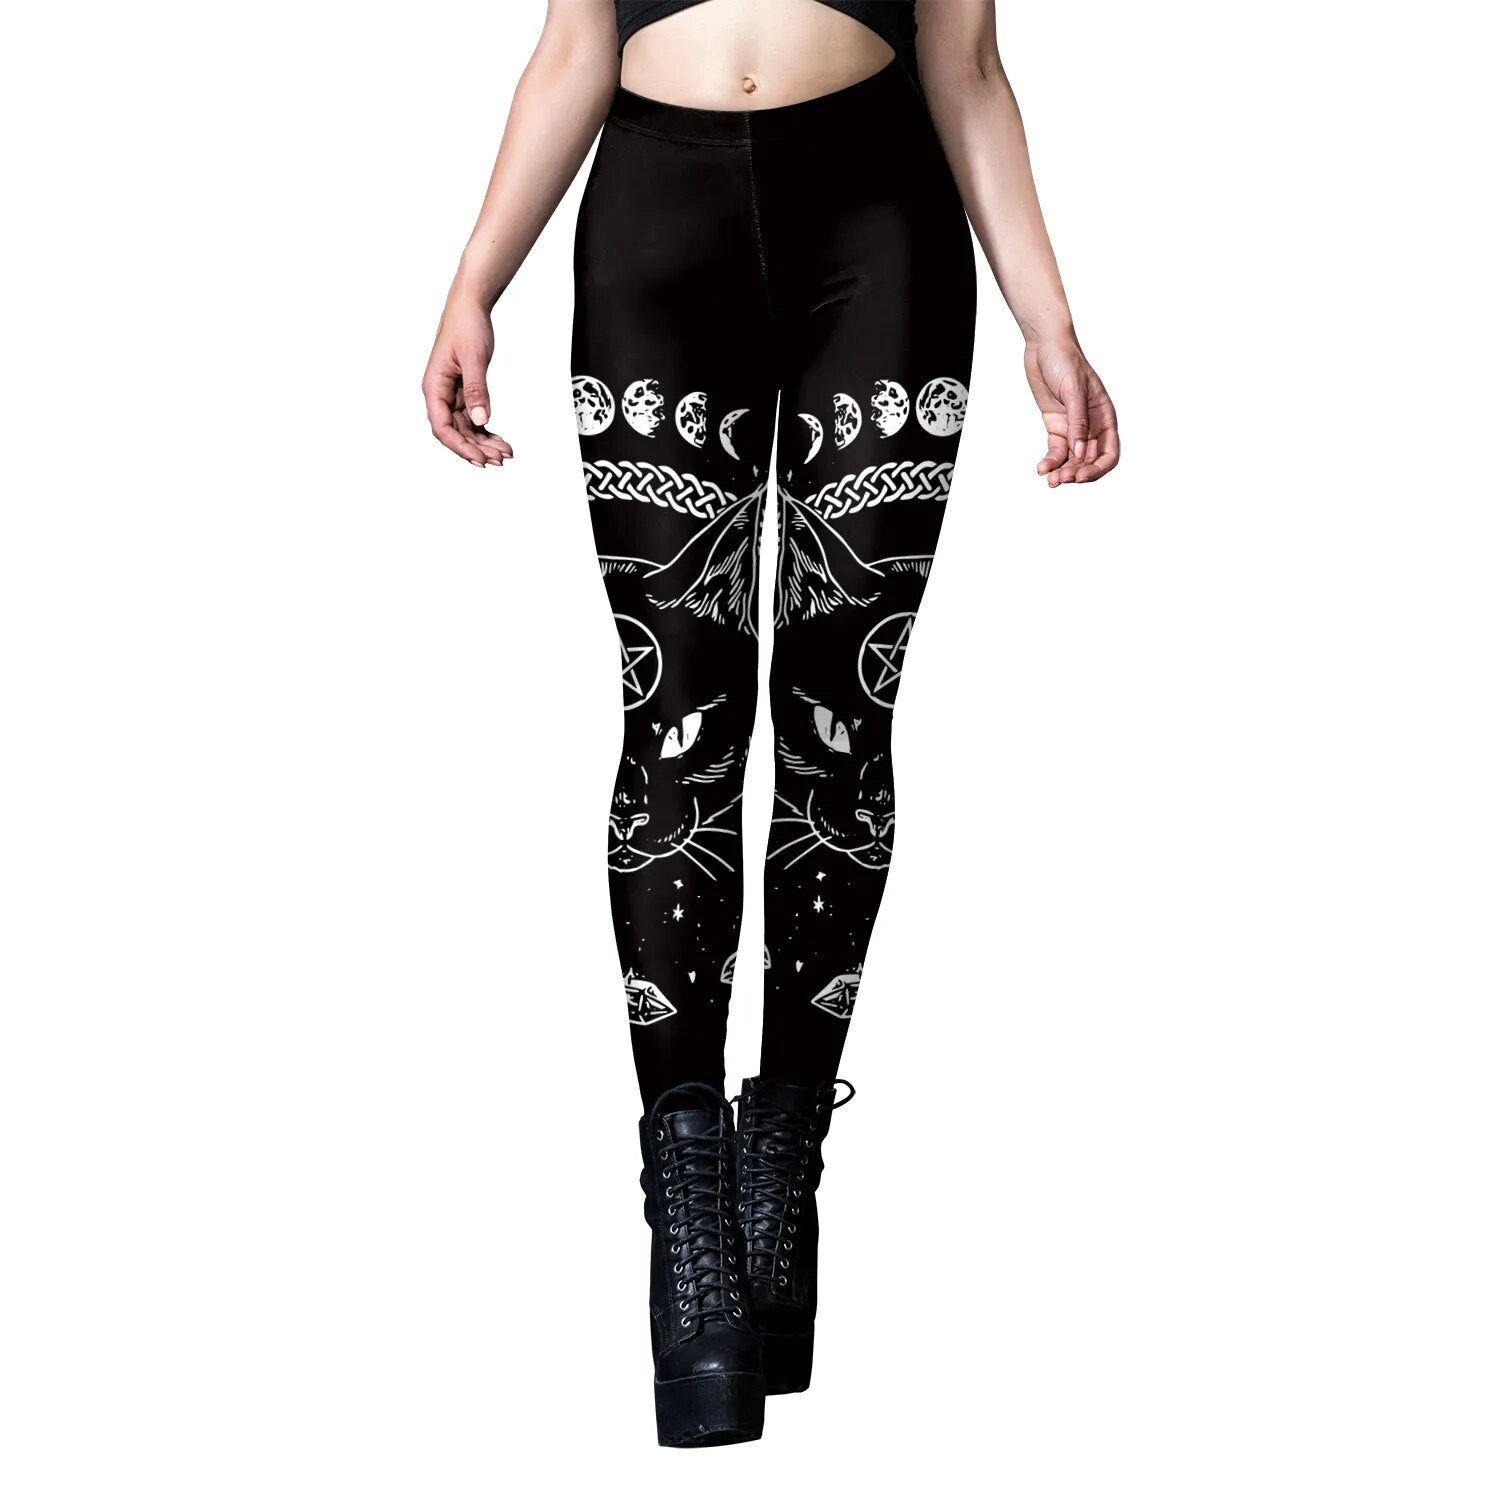 Gothic Black Graphic Leggings | Occult Black Cat | Mid Rise Form Fitting Sleek & Stylish Total Comfort - A Gothic Universe - Leggings